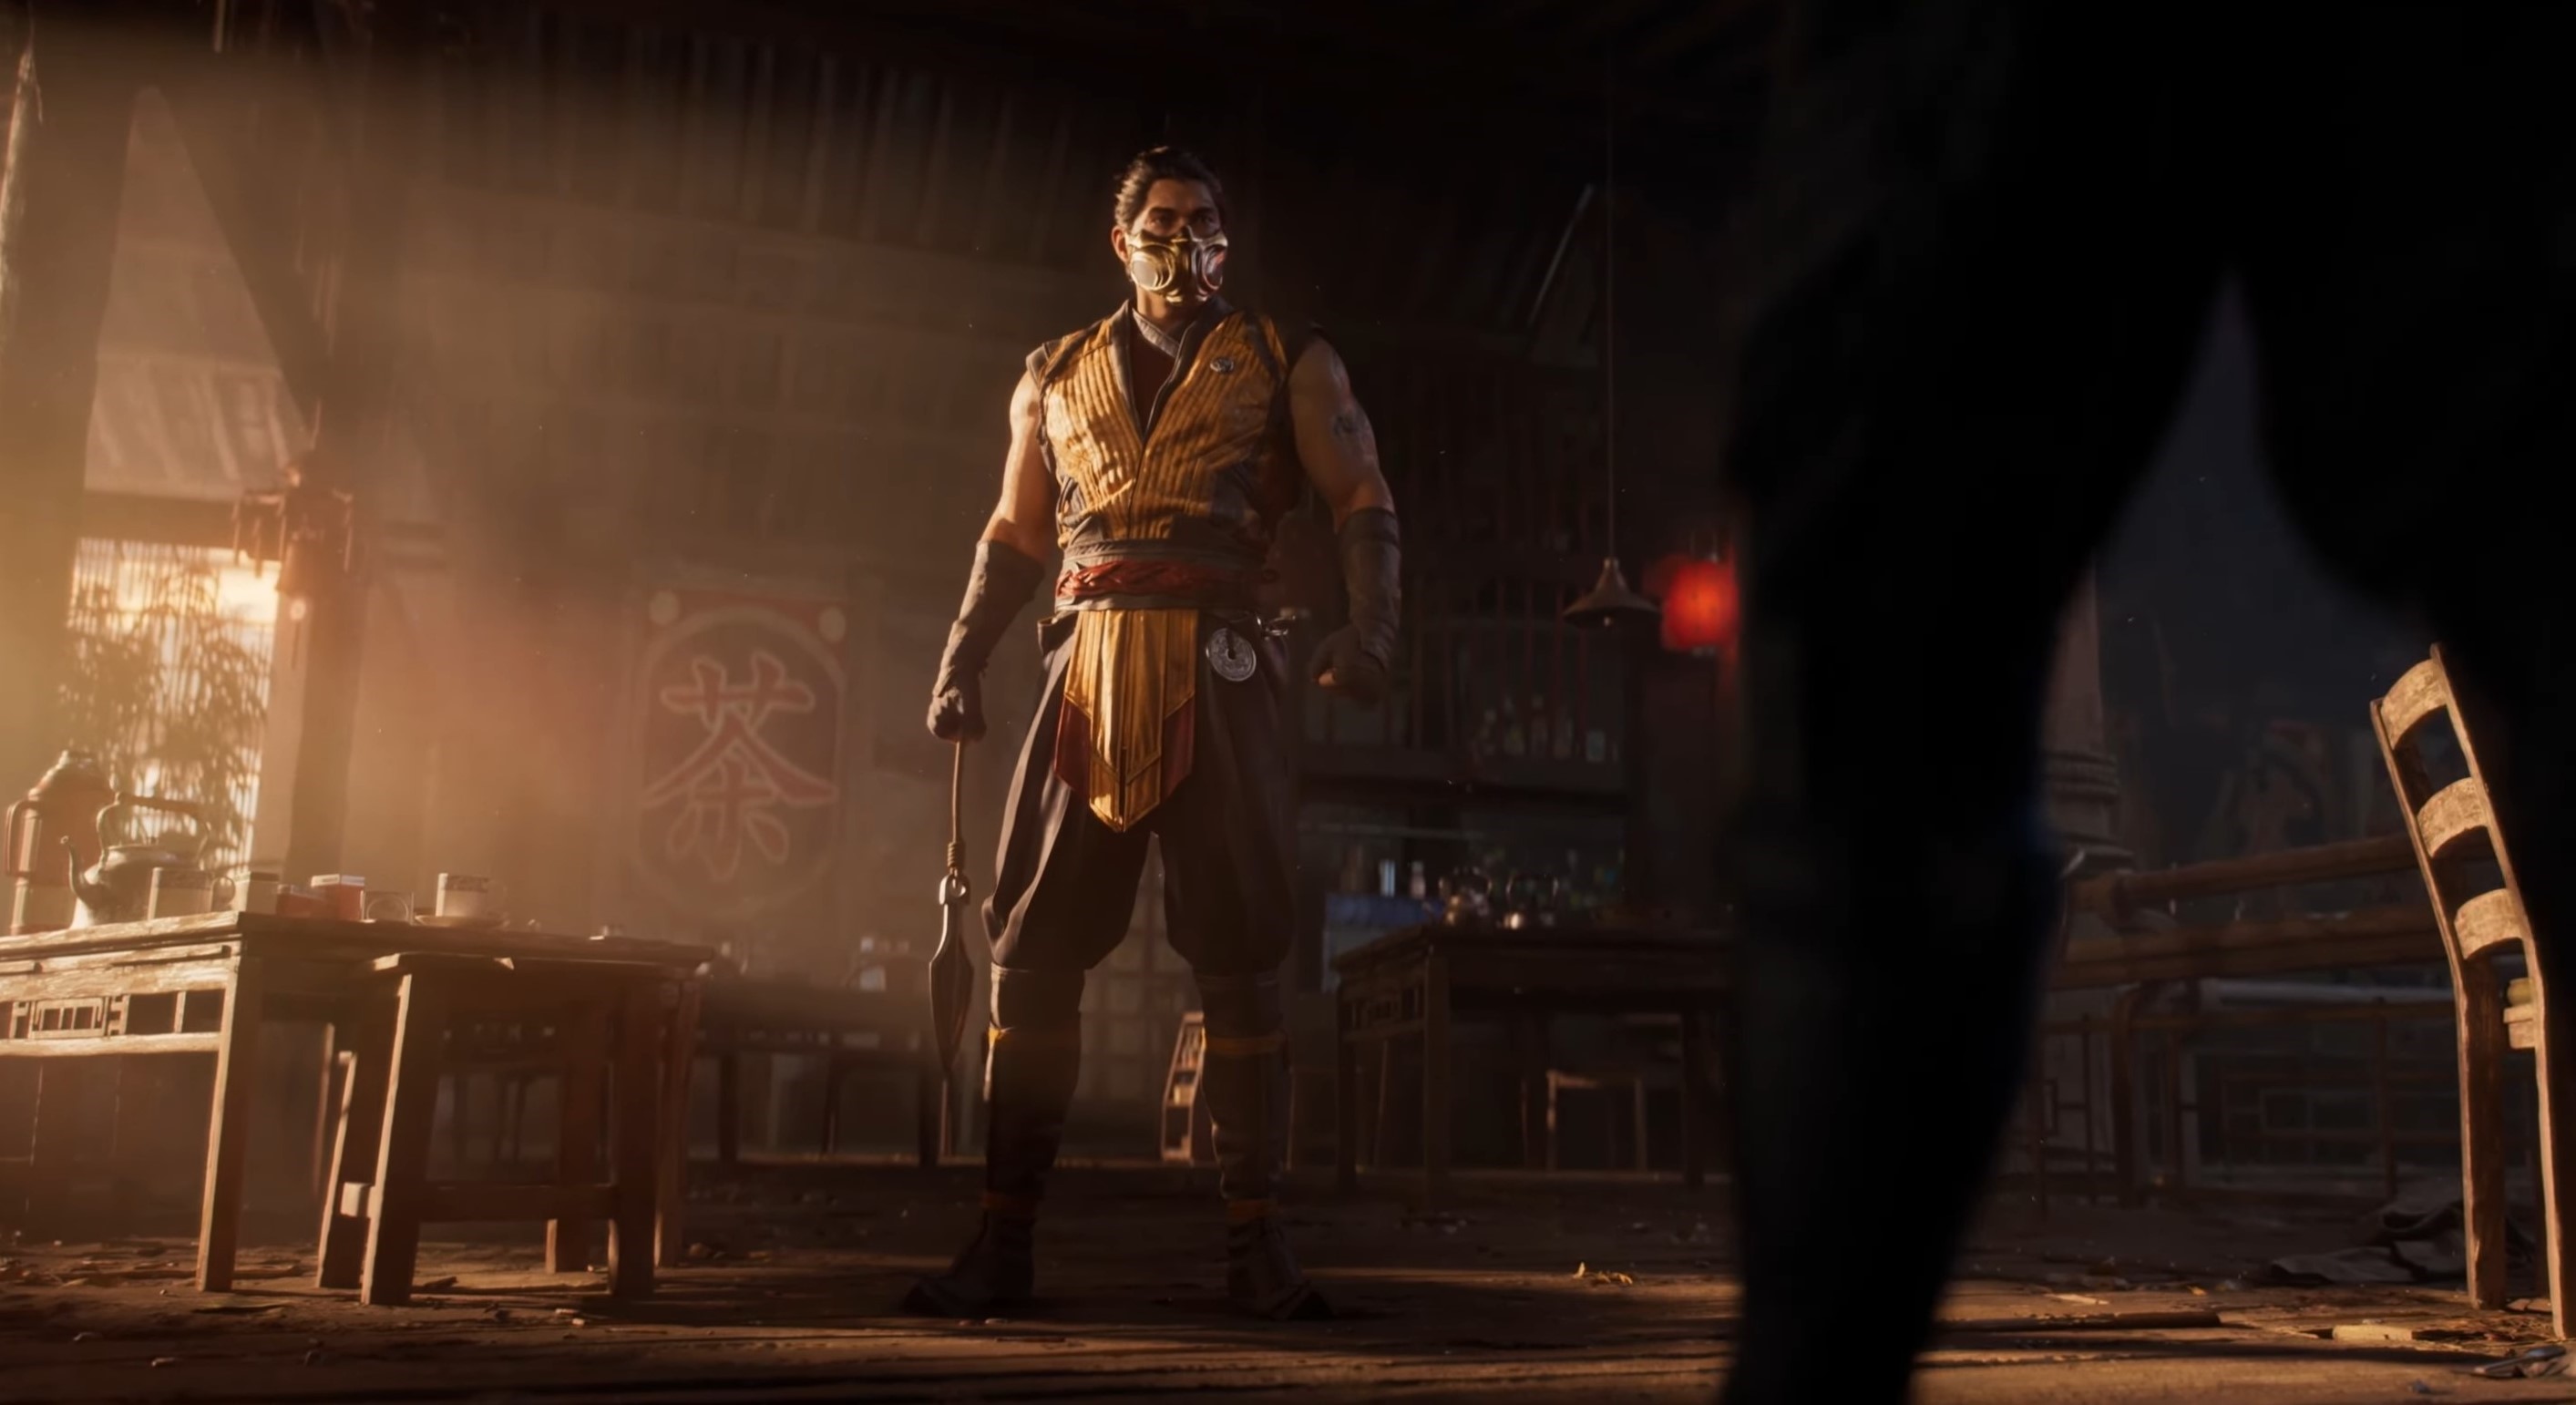 Mortal Kombat Movie Launches New Trailer: Here is What We Know